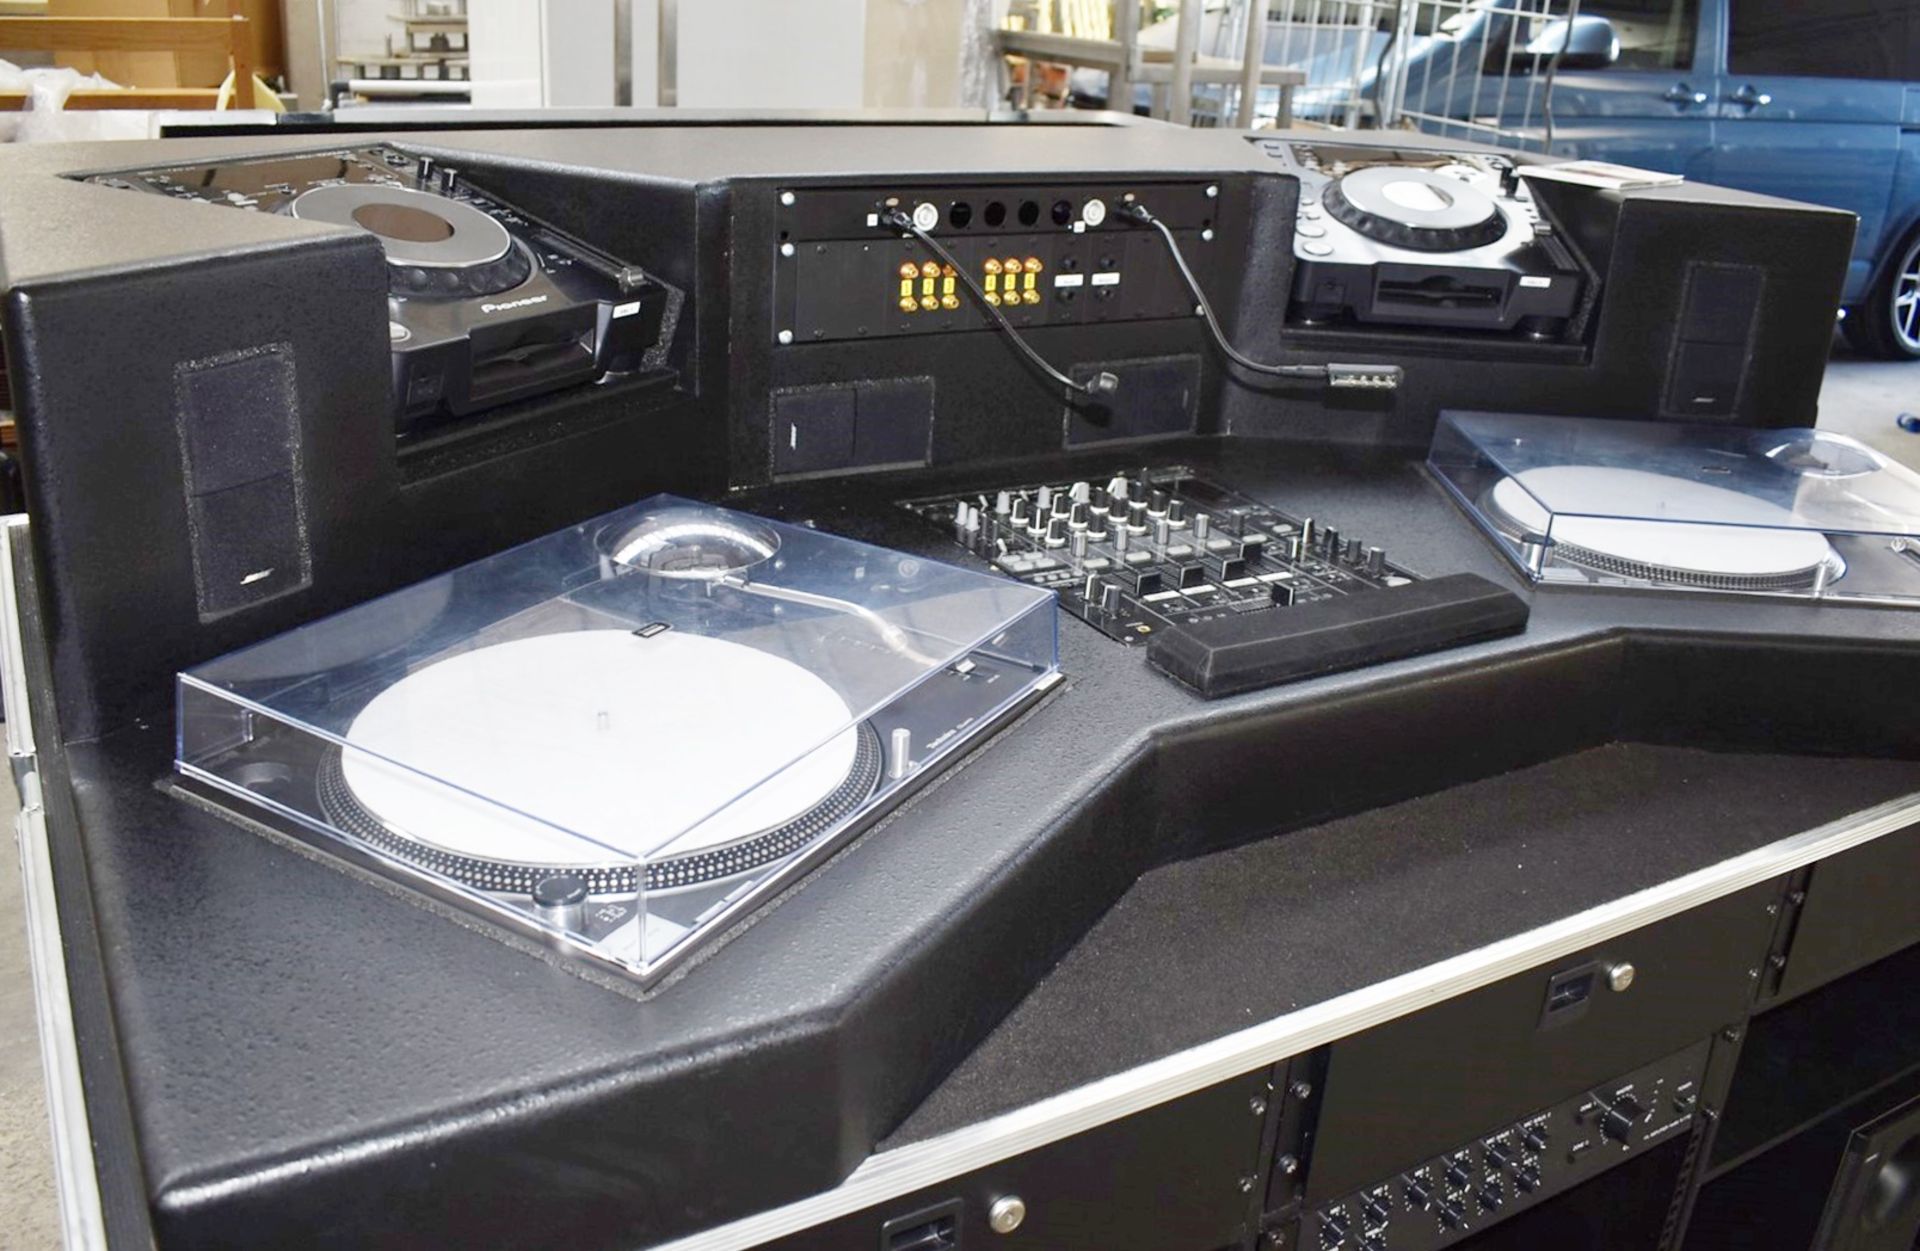 1 x Mobile DJ Booth in Shock Solutions Flight Case - Features Equipment By Pioneer, Technics & Bose! - Image 76 of 95